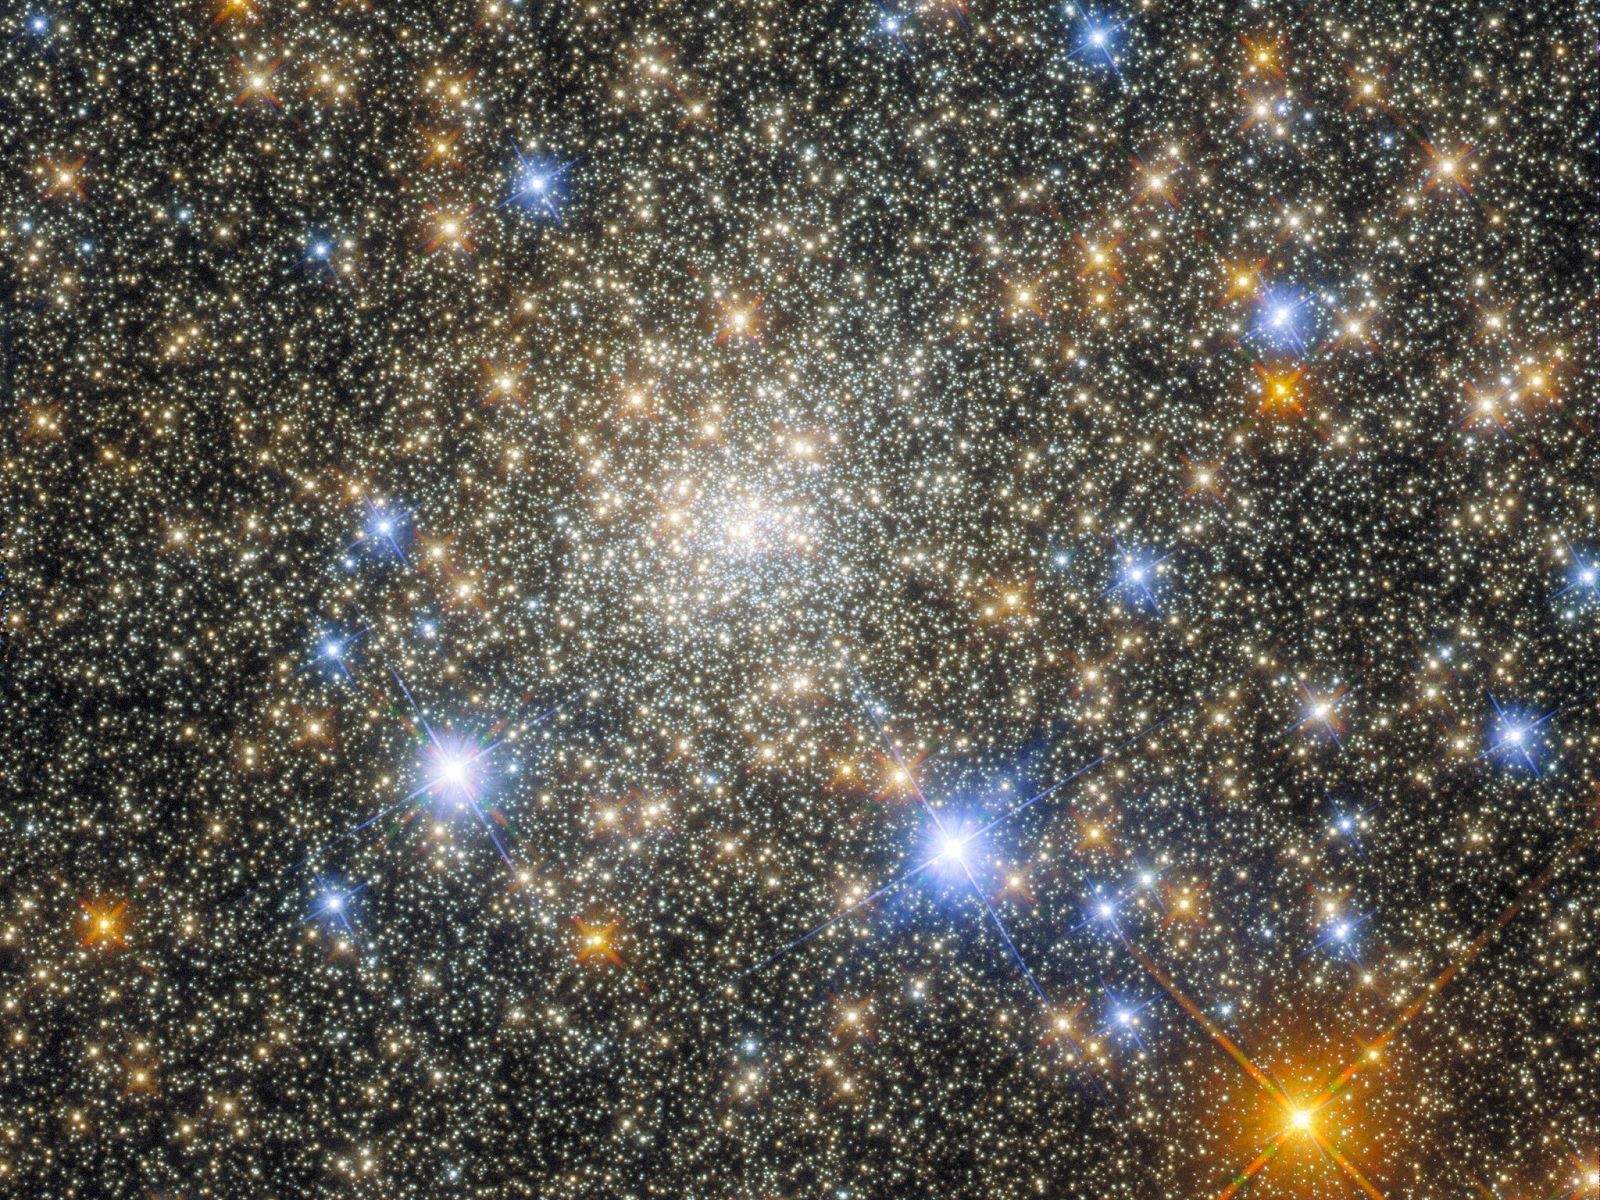 astounding images from the depths of the universe courtesy of the hubble space telescope photo 48